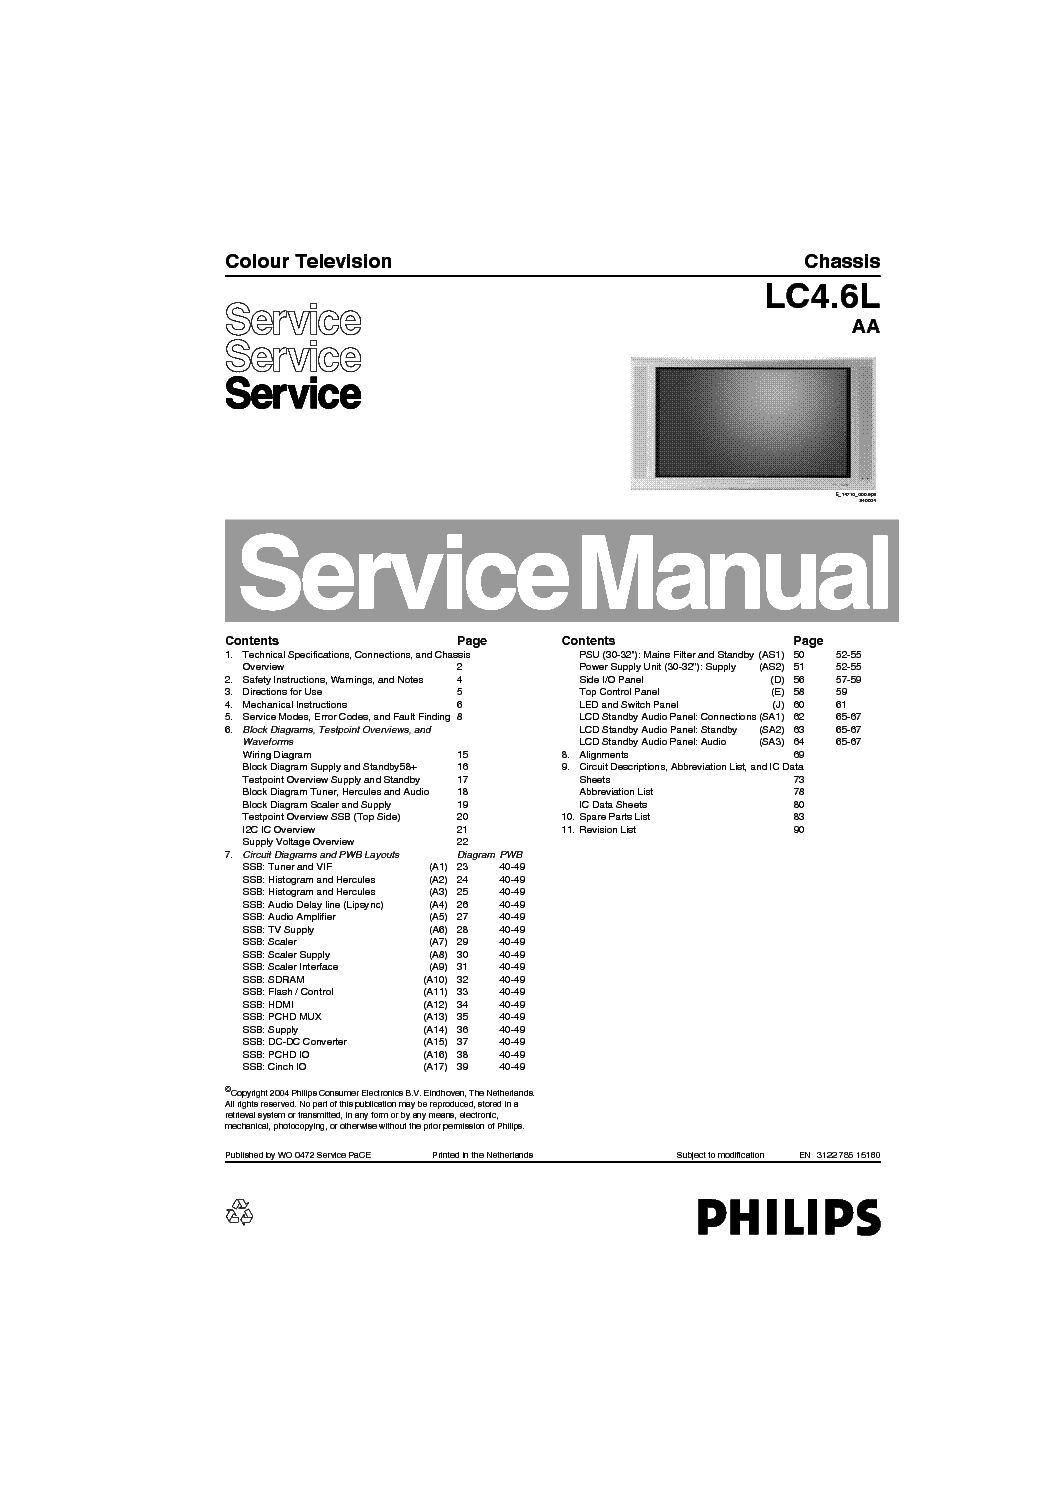 PHILIPS CHASSIS LC4.6L AA service manual (1st page)